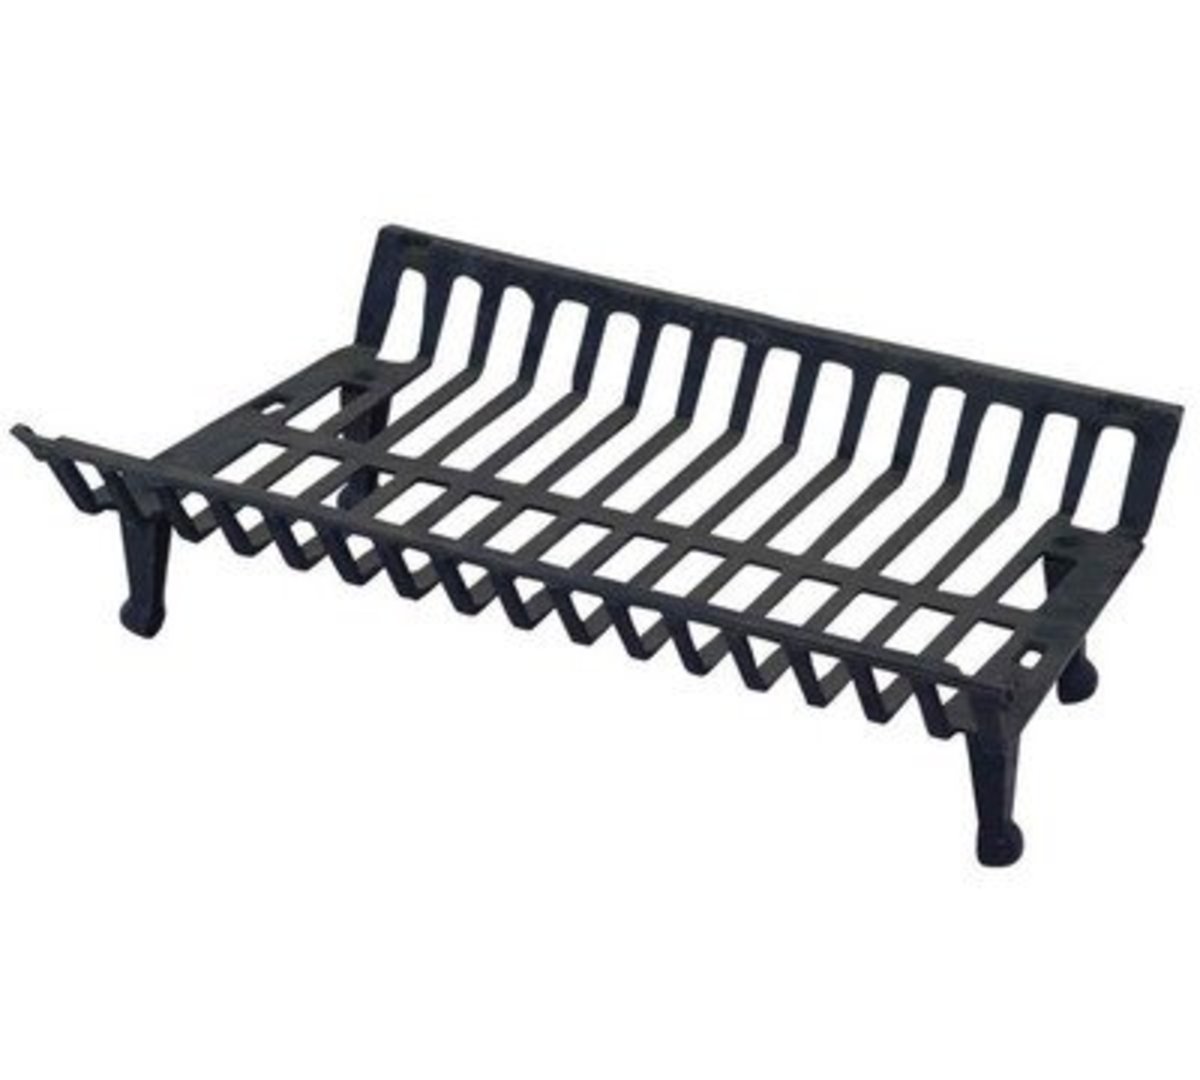 Uniflame Cast Iron Fireplace Grate